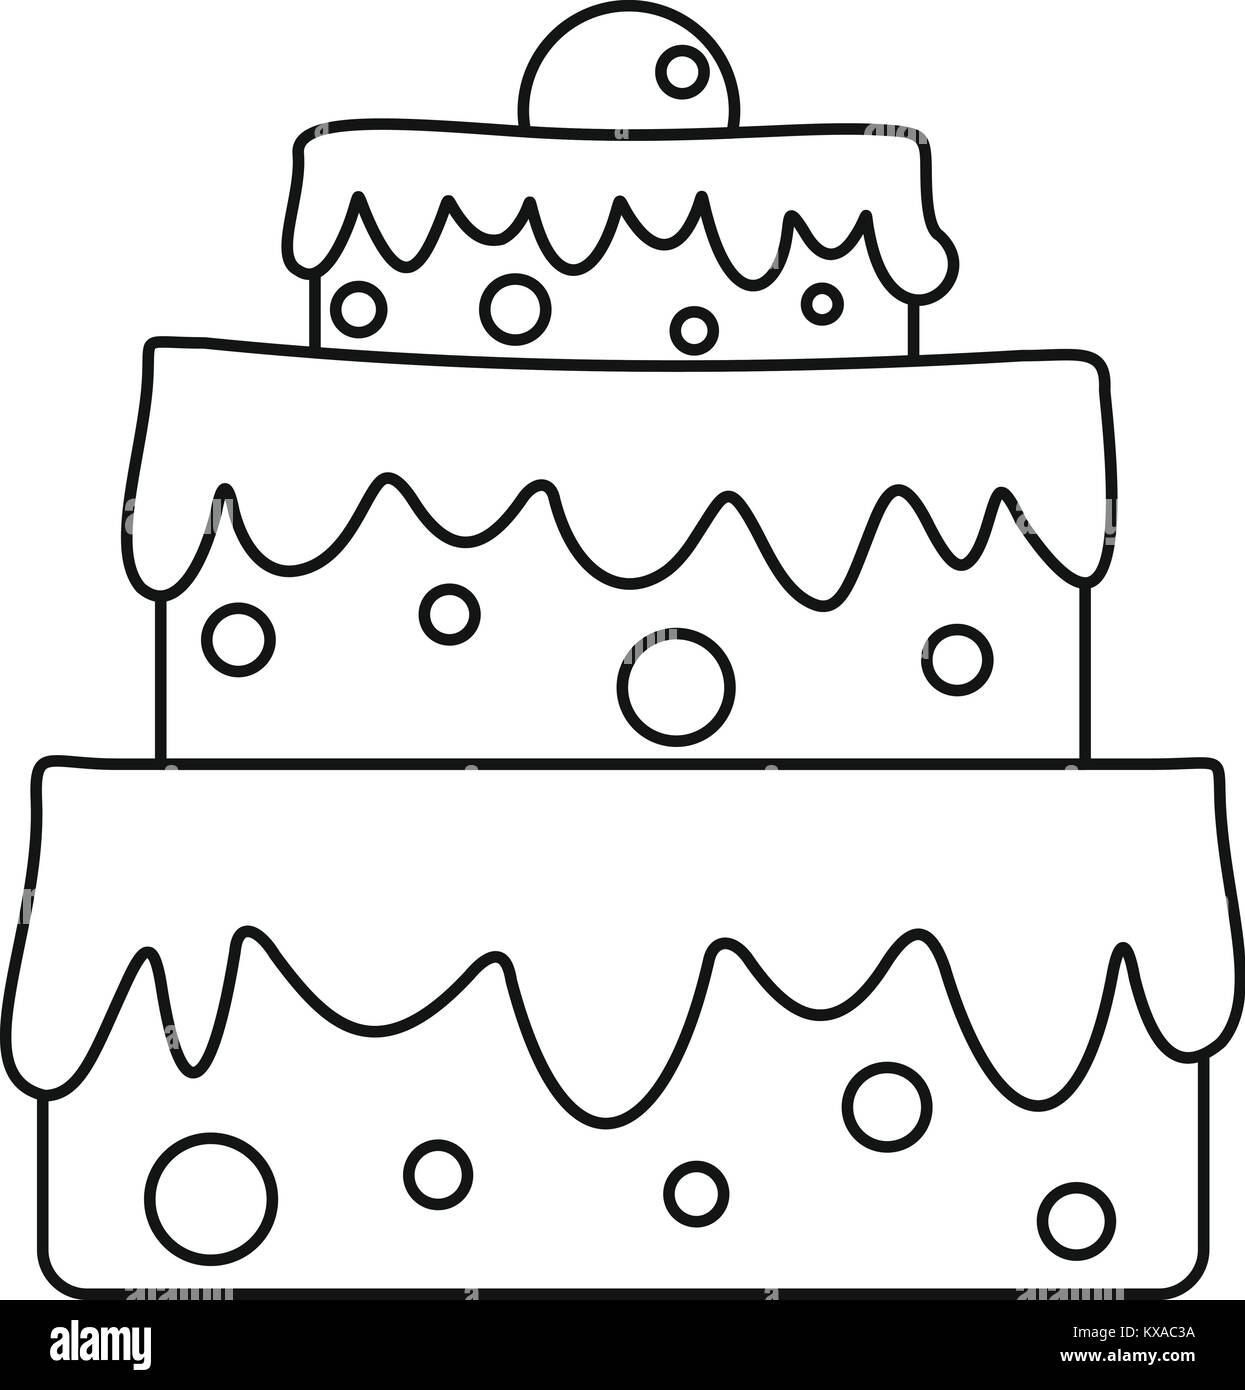 Simple outline vector icon of two-level birthday cake with - stock vector  2704386 | Crushpixel